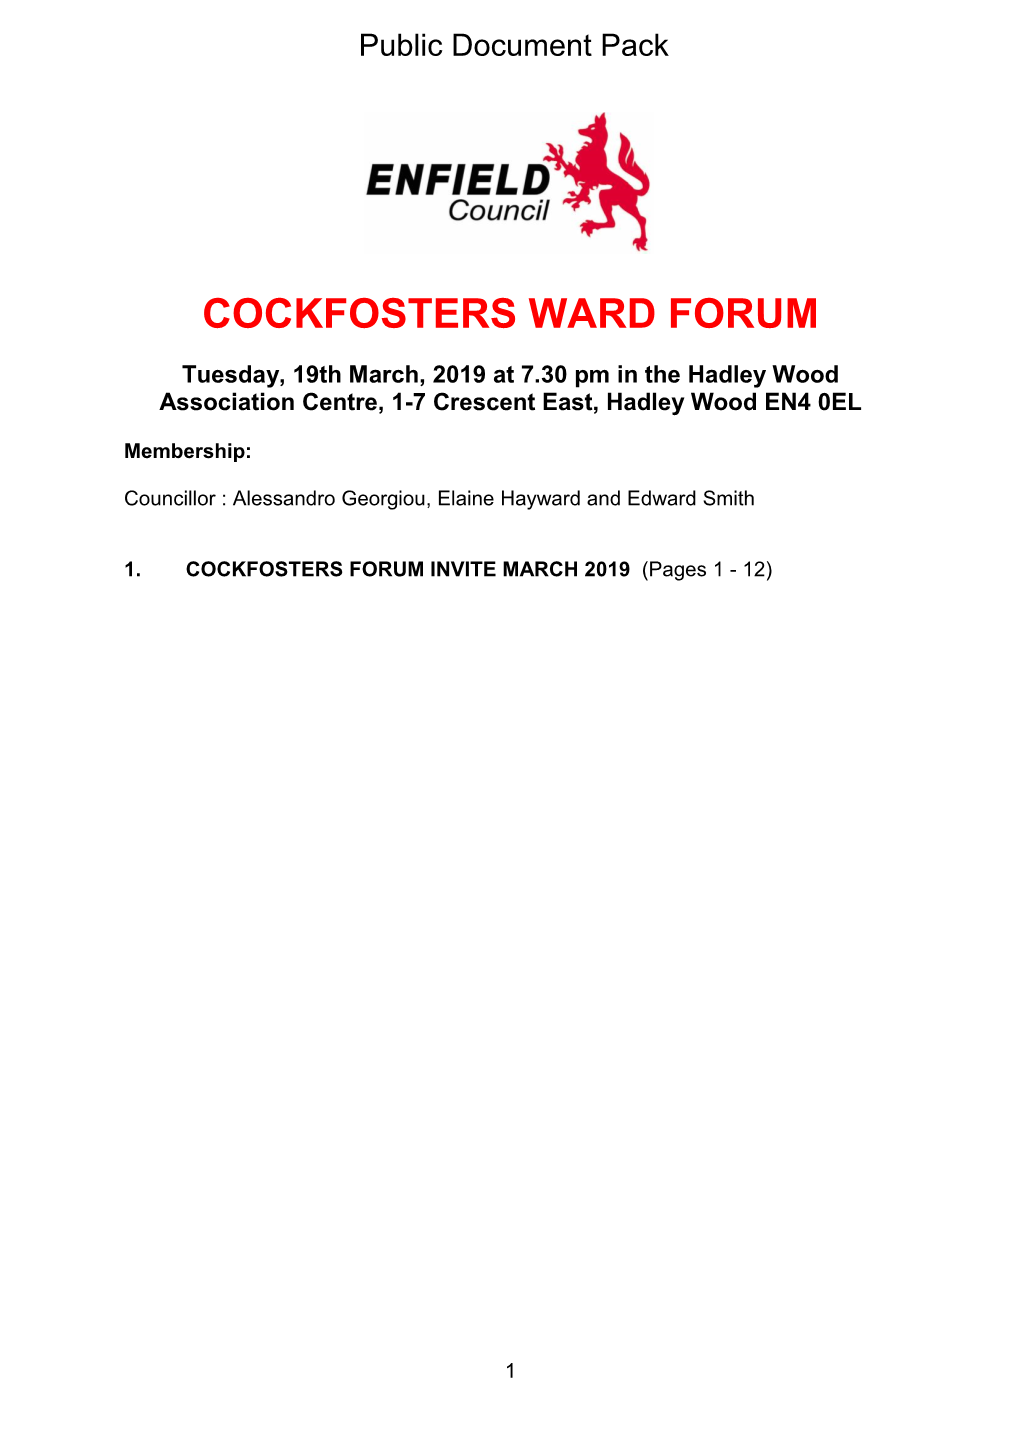 (Public Pack)Agenda Document for Cockfosters Ward Forum, 19/03